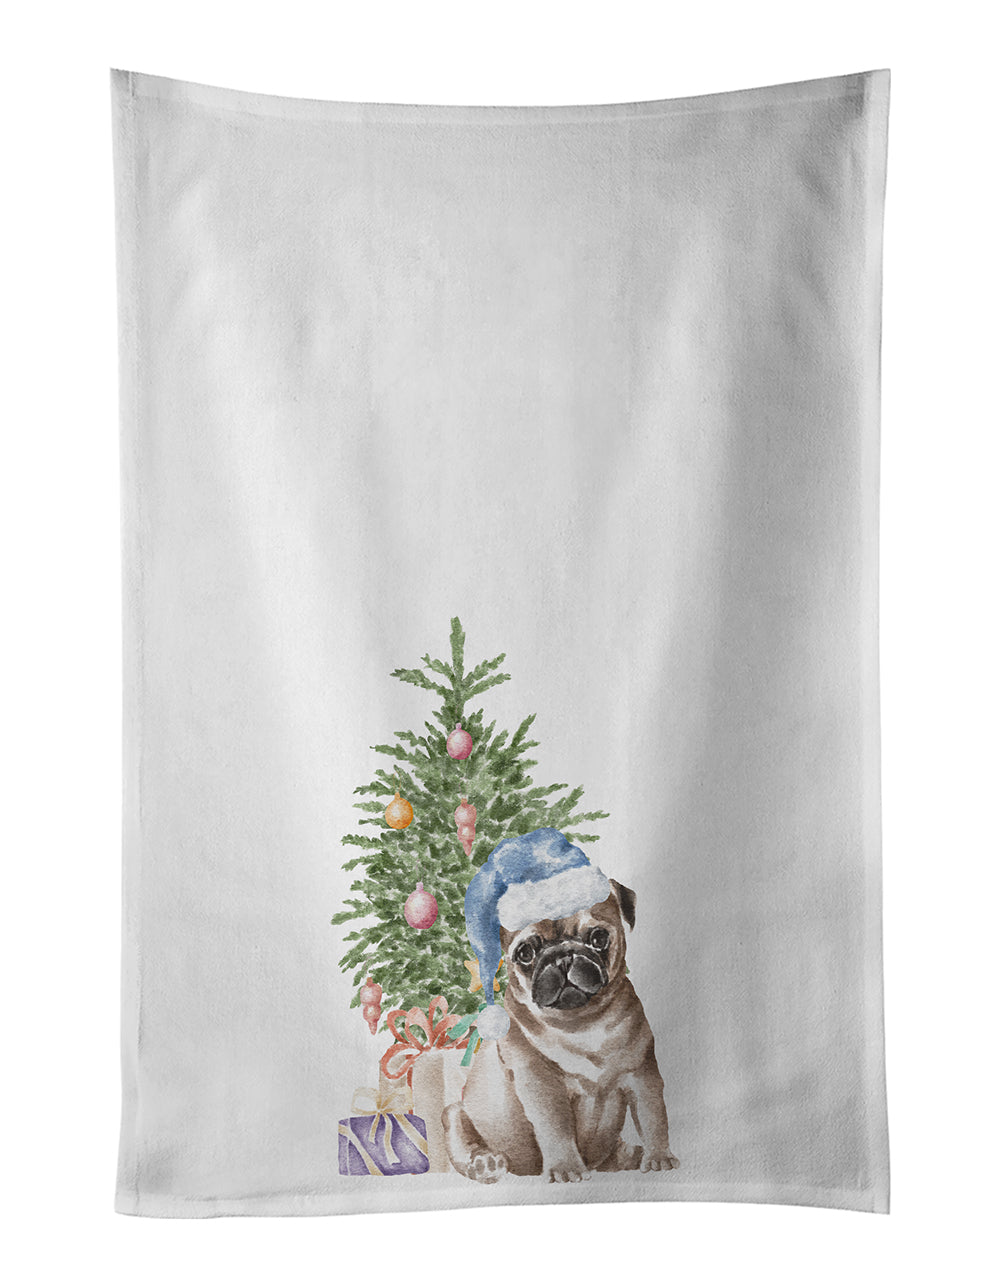 Buy this Pug Fawn Puppy Christmas Presents and Tree White Kitchen Towel Set of 2